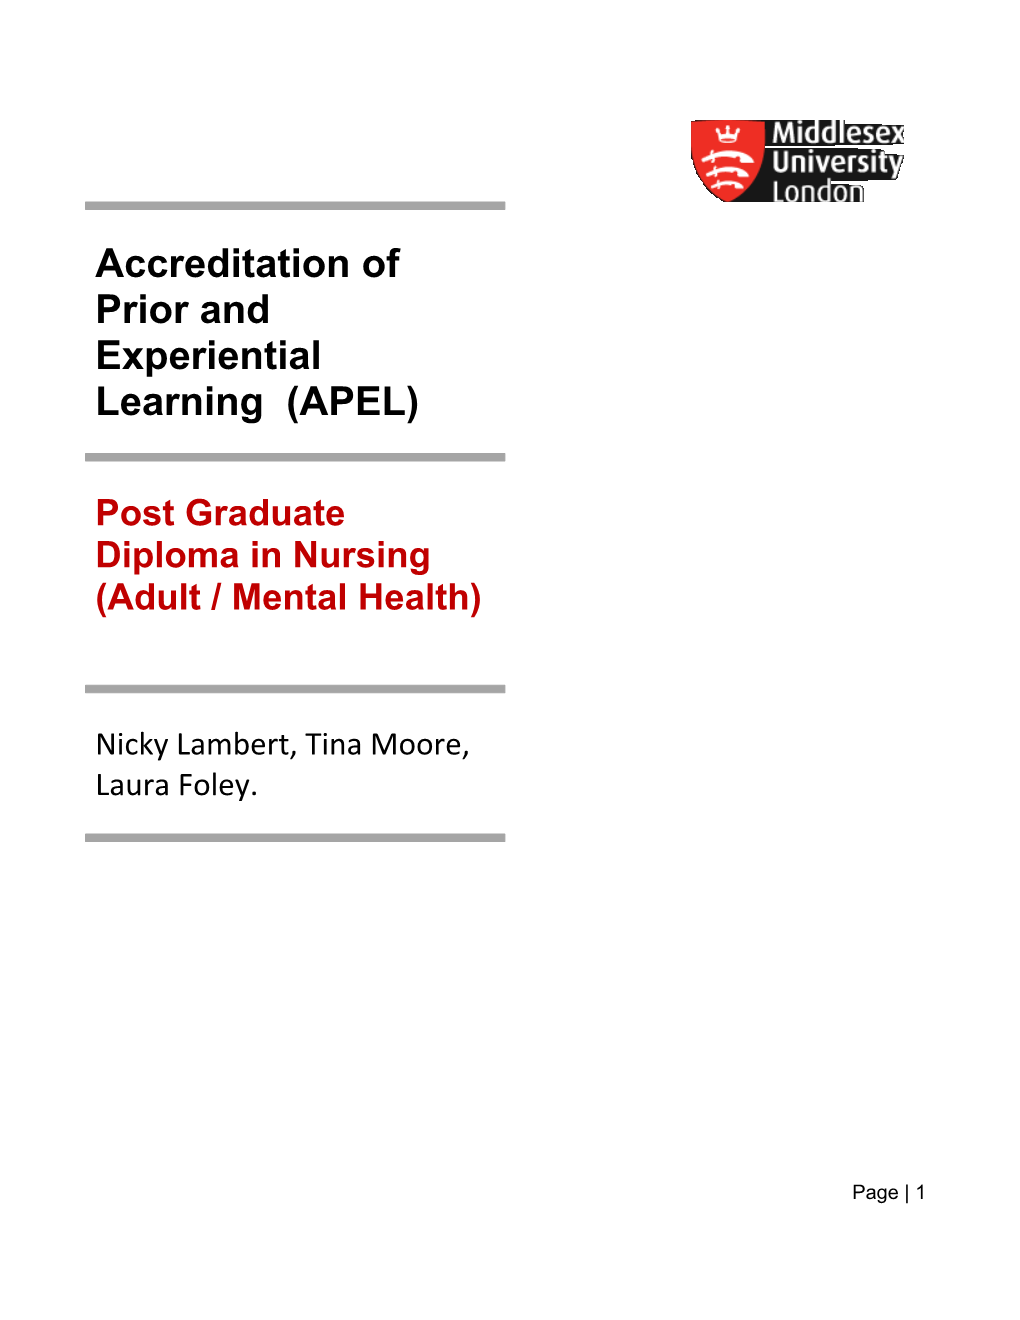 Accreditation of Prior and Experiential Learning (APEL)